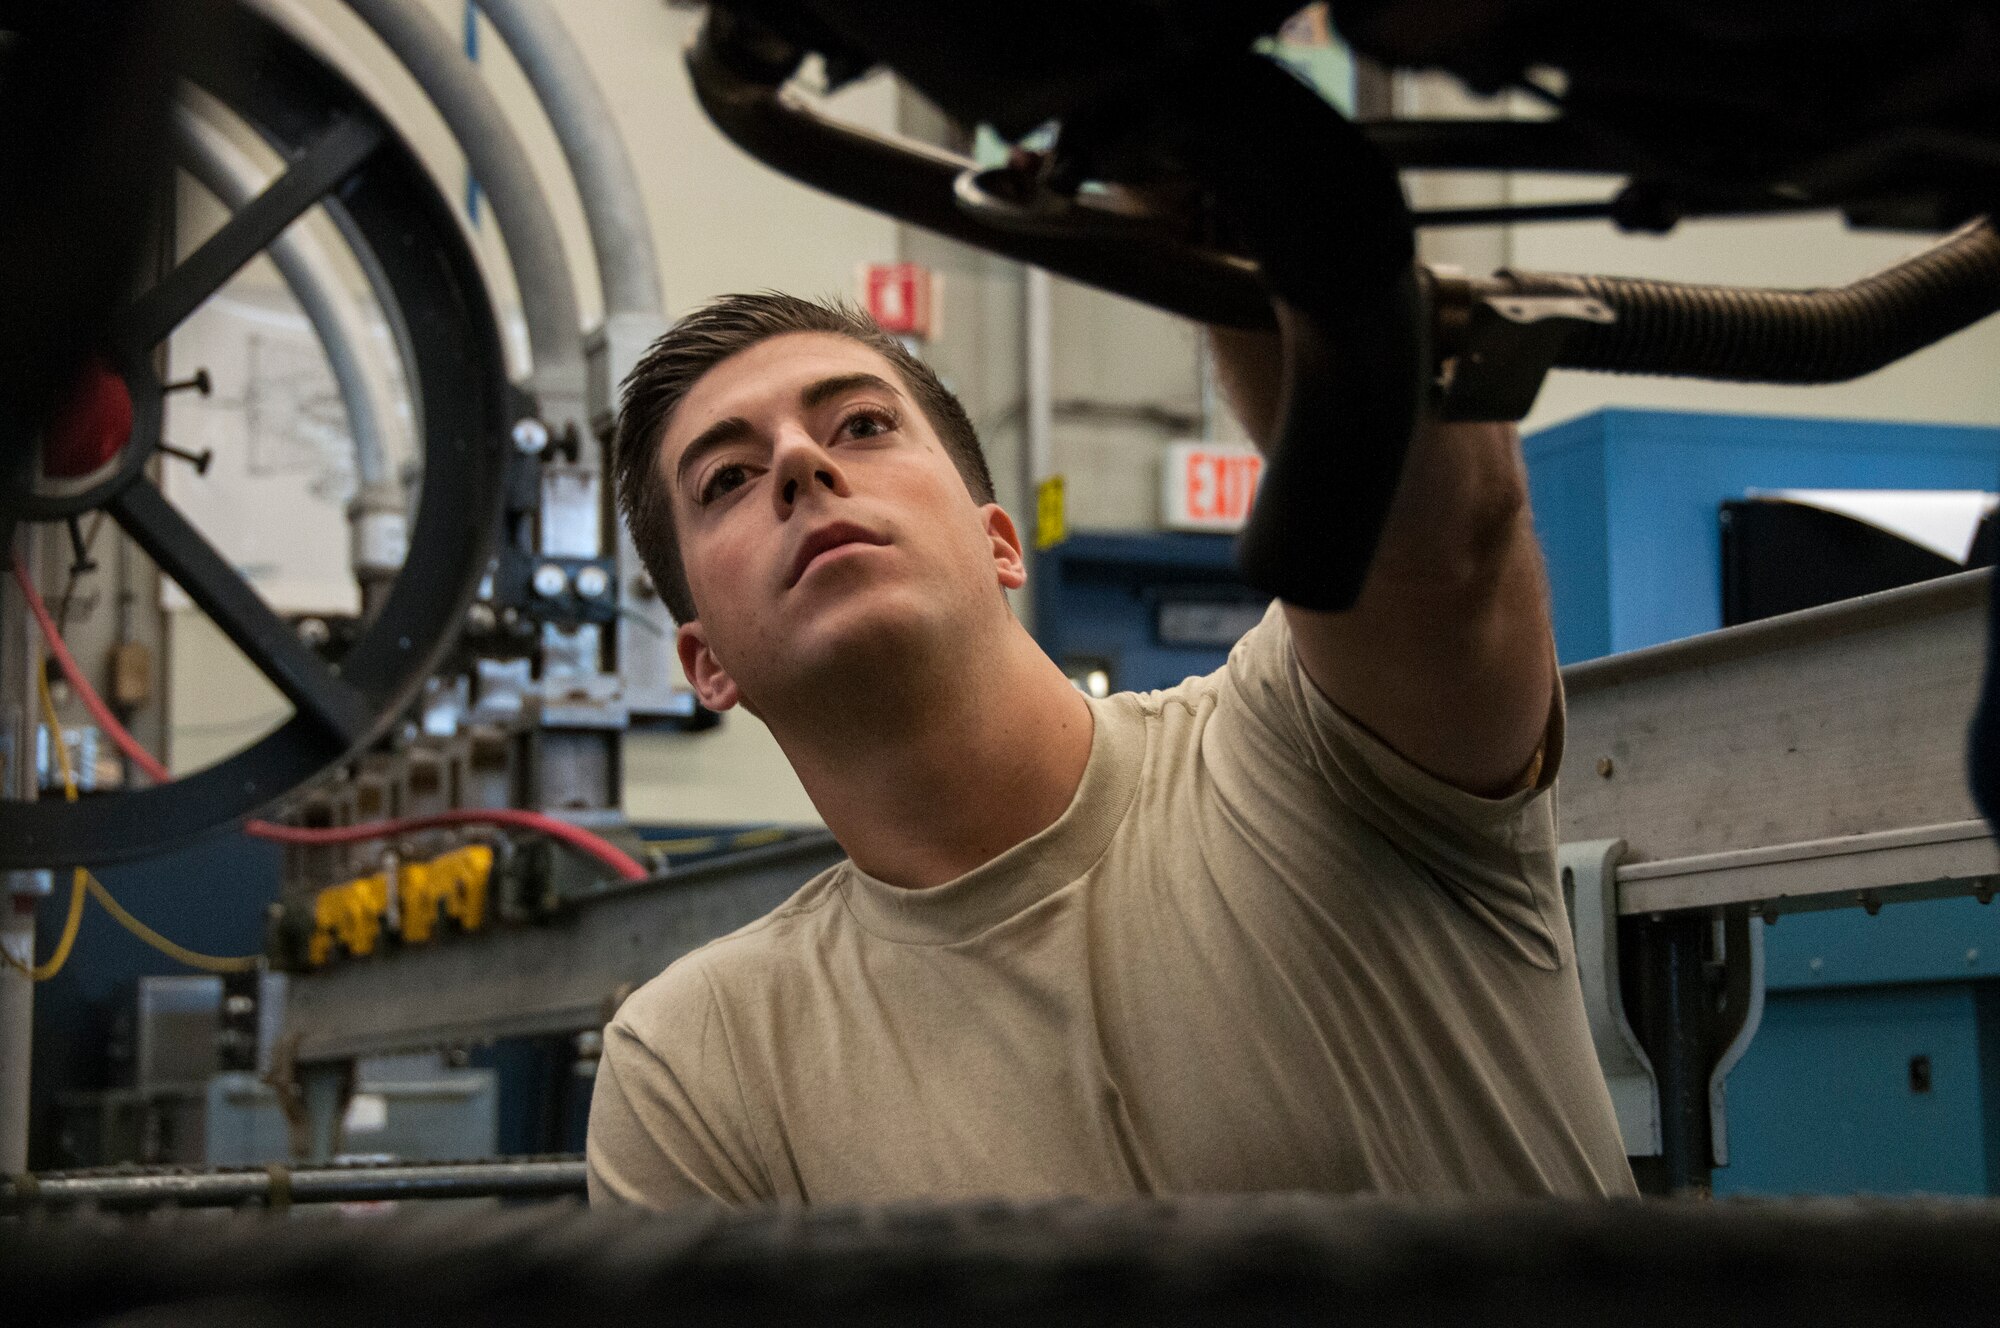 Senior Airman Andrew Feighery, 104th Maintenance Squadron aircraft engine mechanic, removes an augmenter module Oct. 17, 2018, at Barnes Air National Guard Base, Massachusetts. Feighery's recent deployment experience and mechanical engineering studies at The University of Massachusetts have further developed his skills as a mechanic. (U.S. Air National Guard Photo by Airman 1st Class Randy Burlingame)